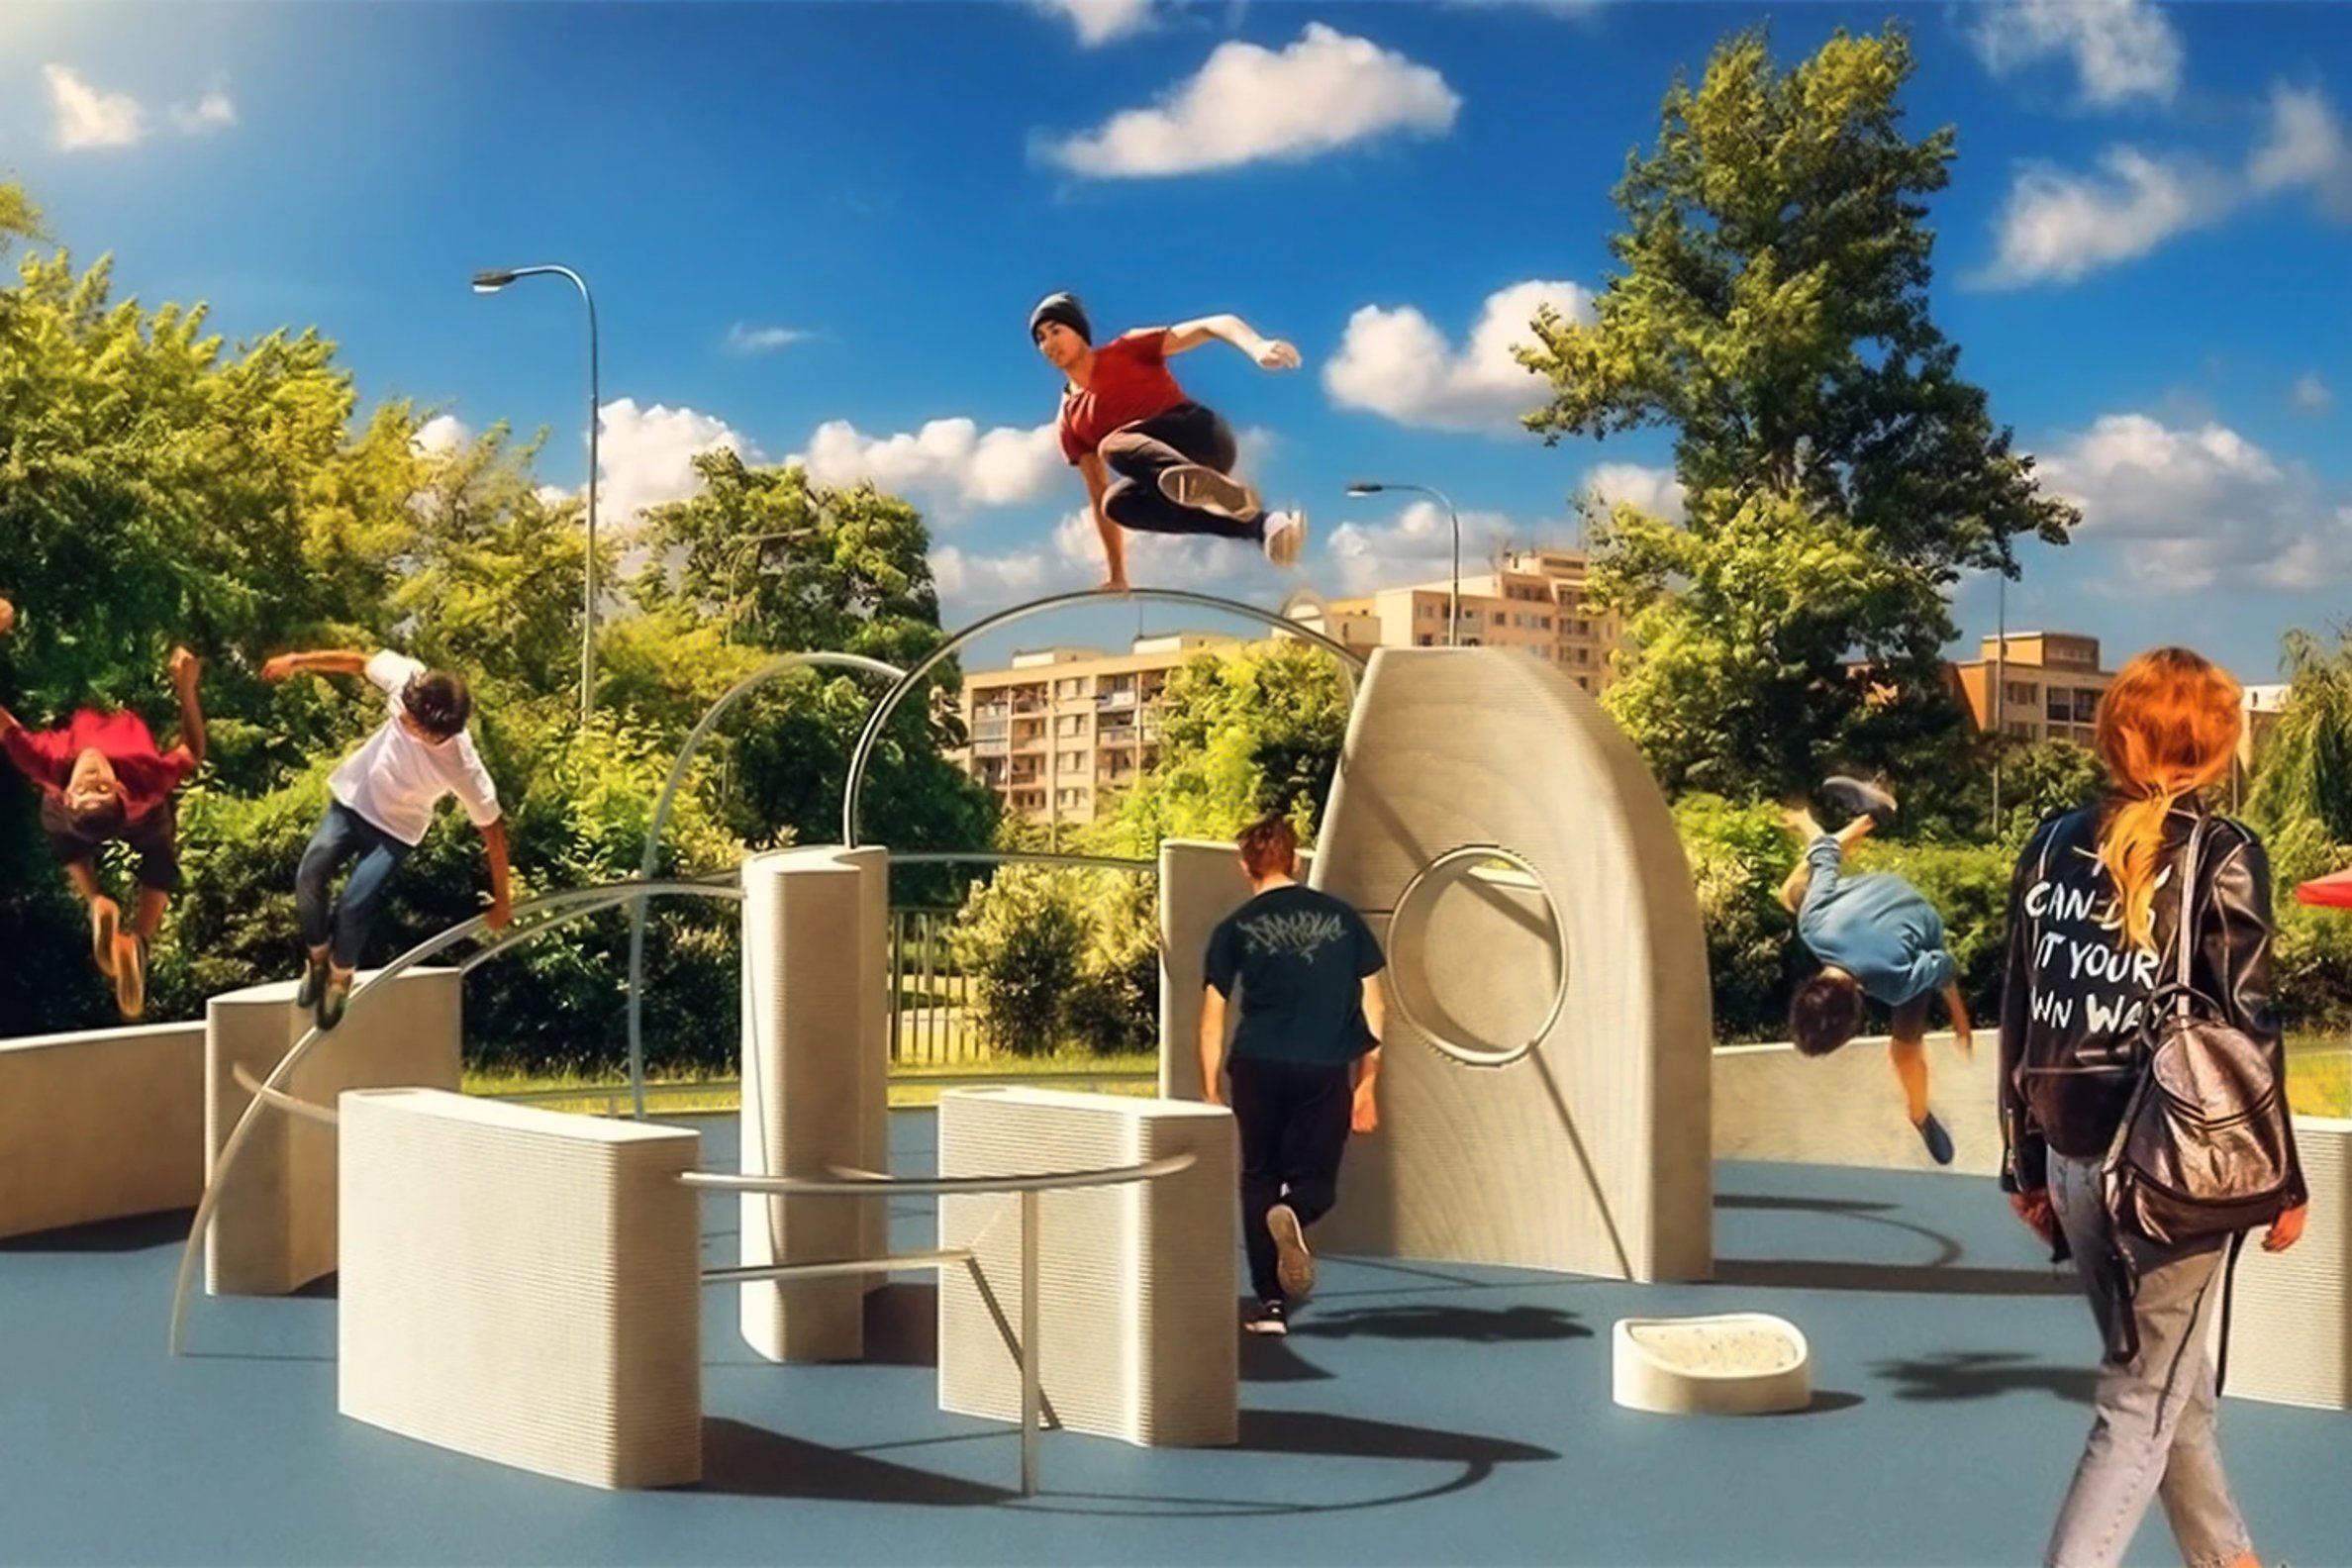 The world’s first 3D-printed parkour playground was made with recycled concrete!